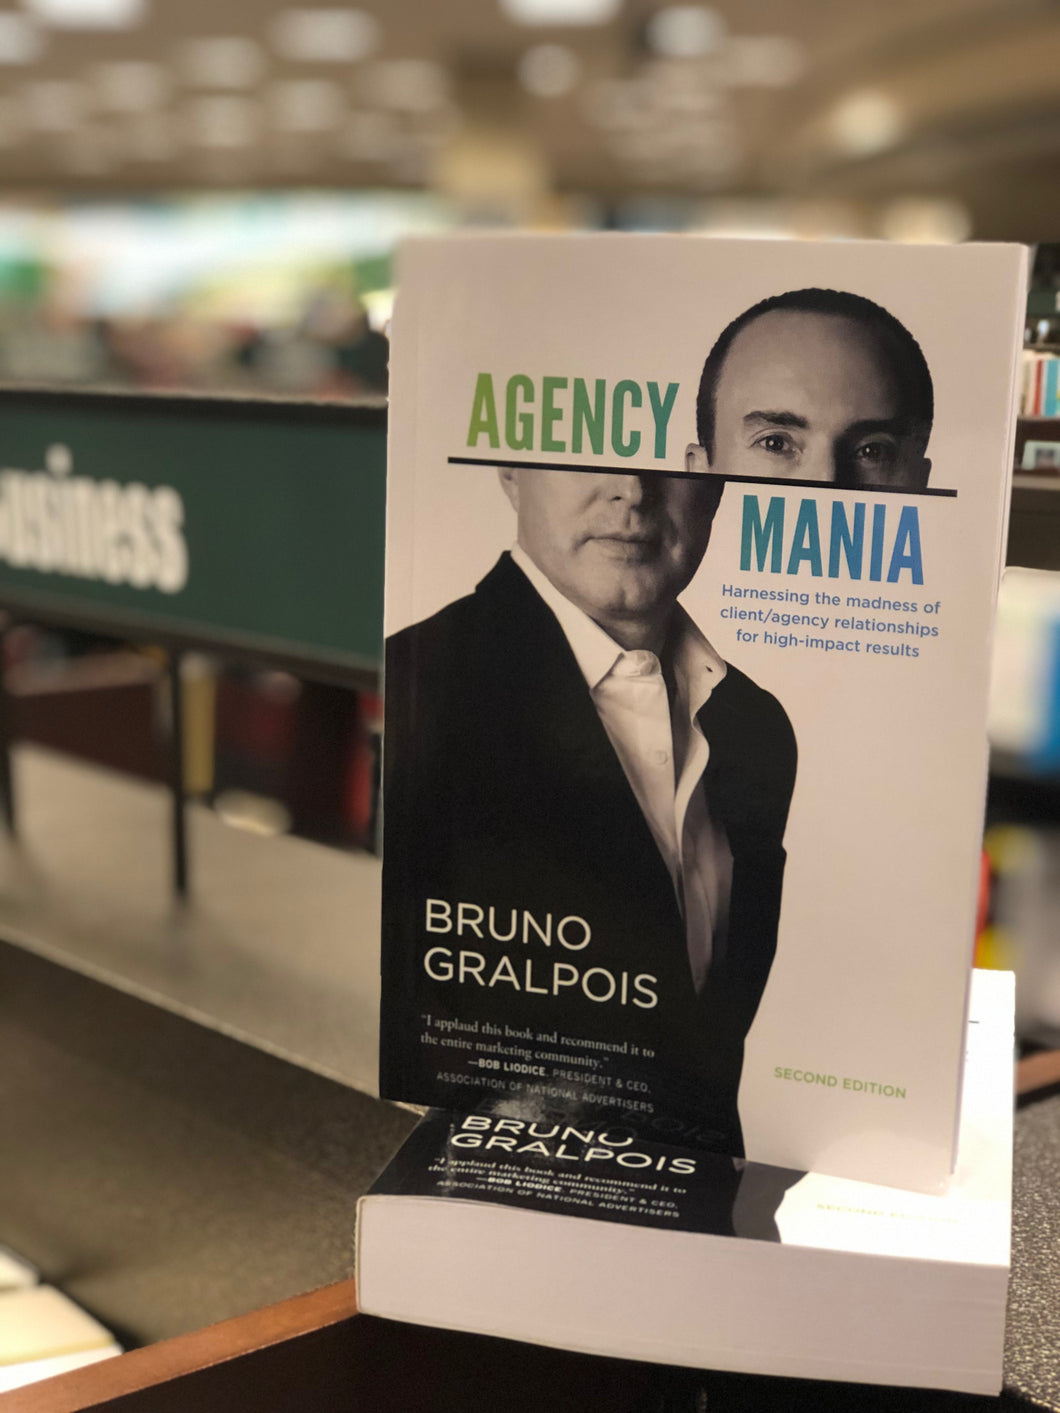 Agency Mania 2nd edition (paperback)